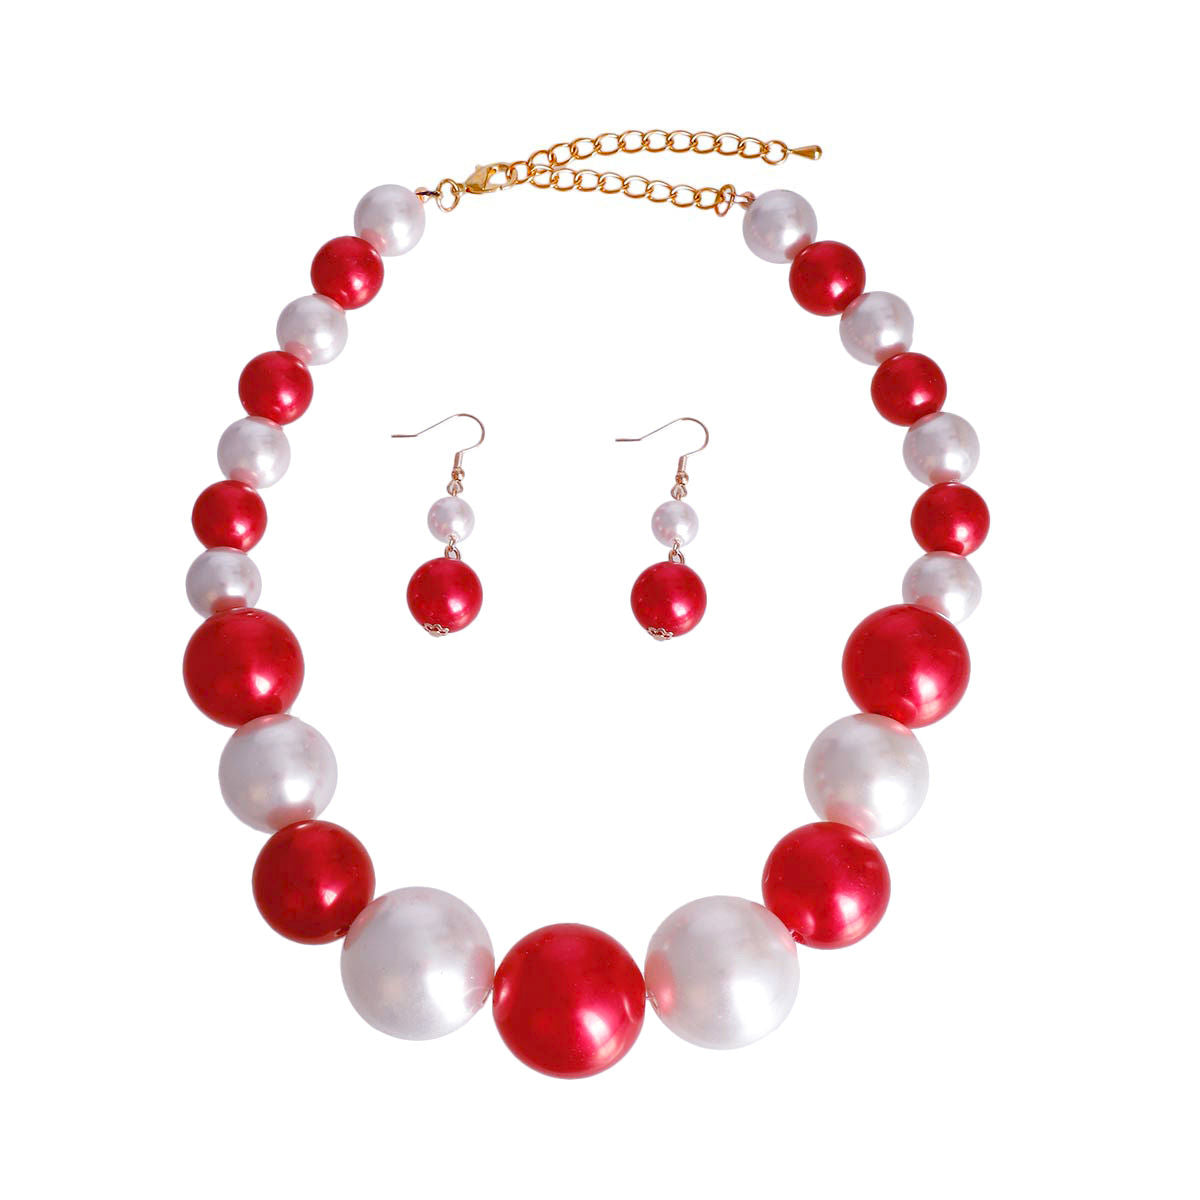 Red and White Jumbo Bubble Gum Pearls